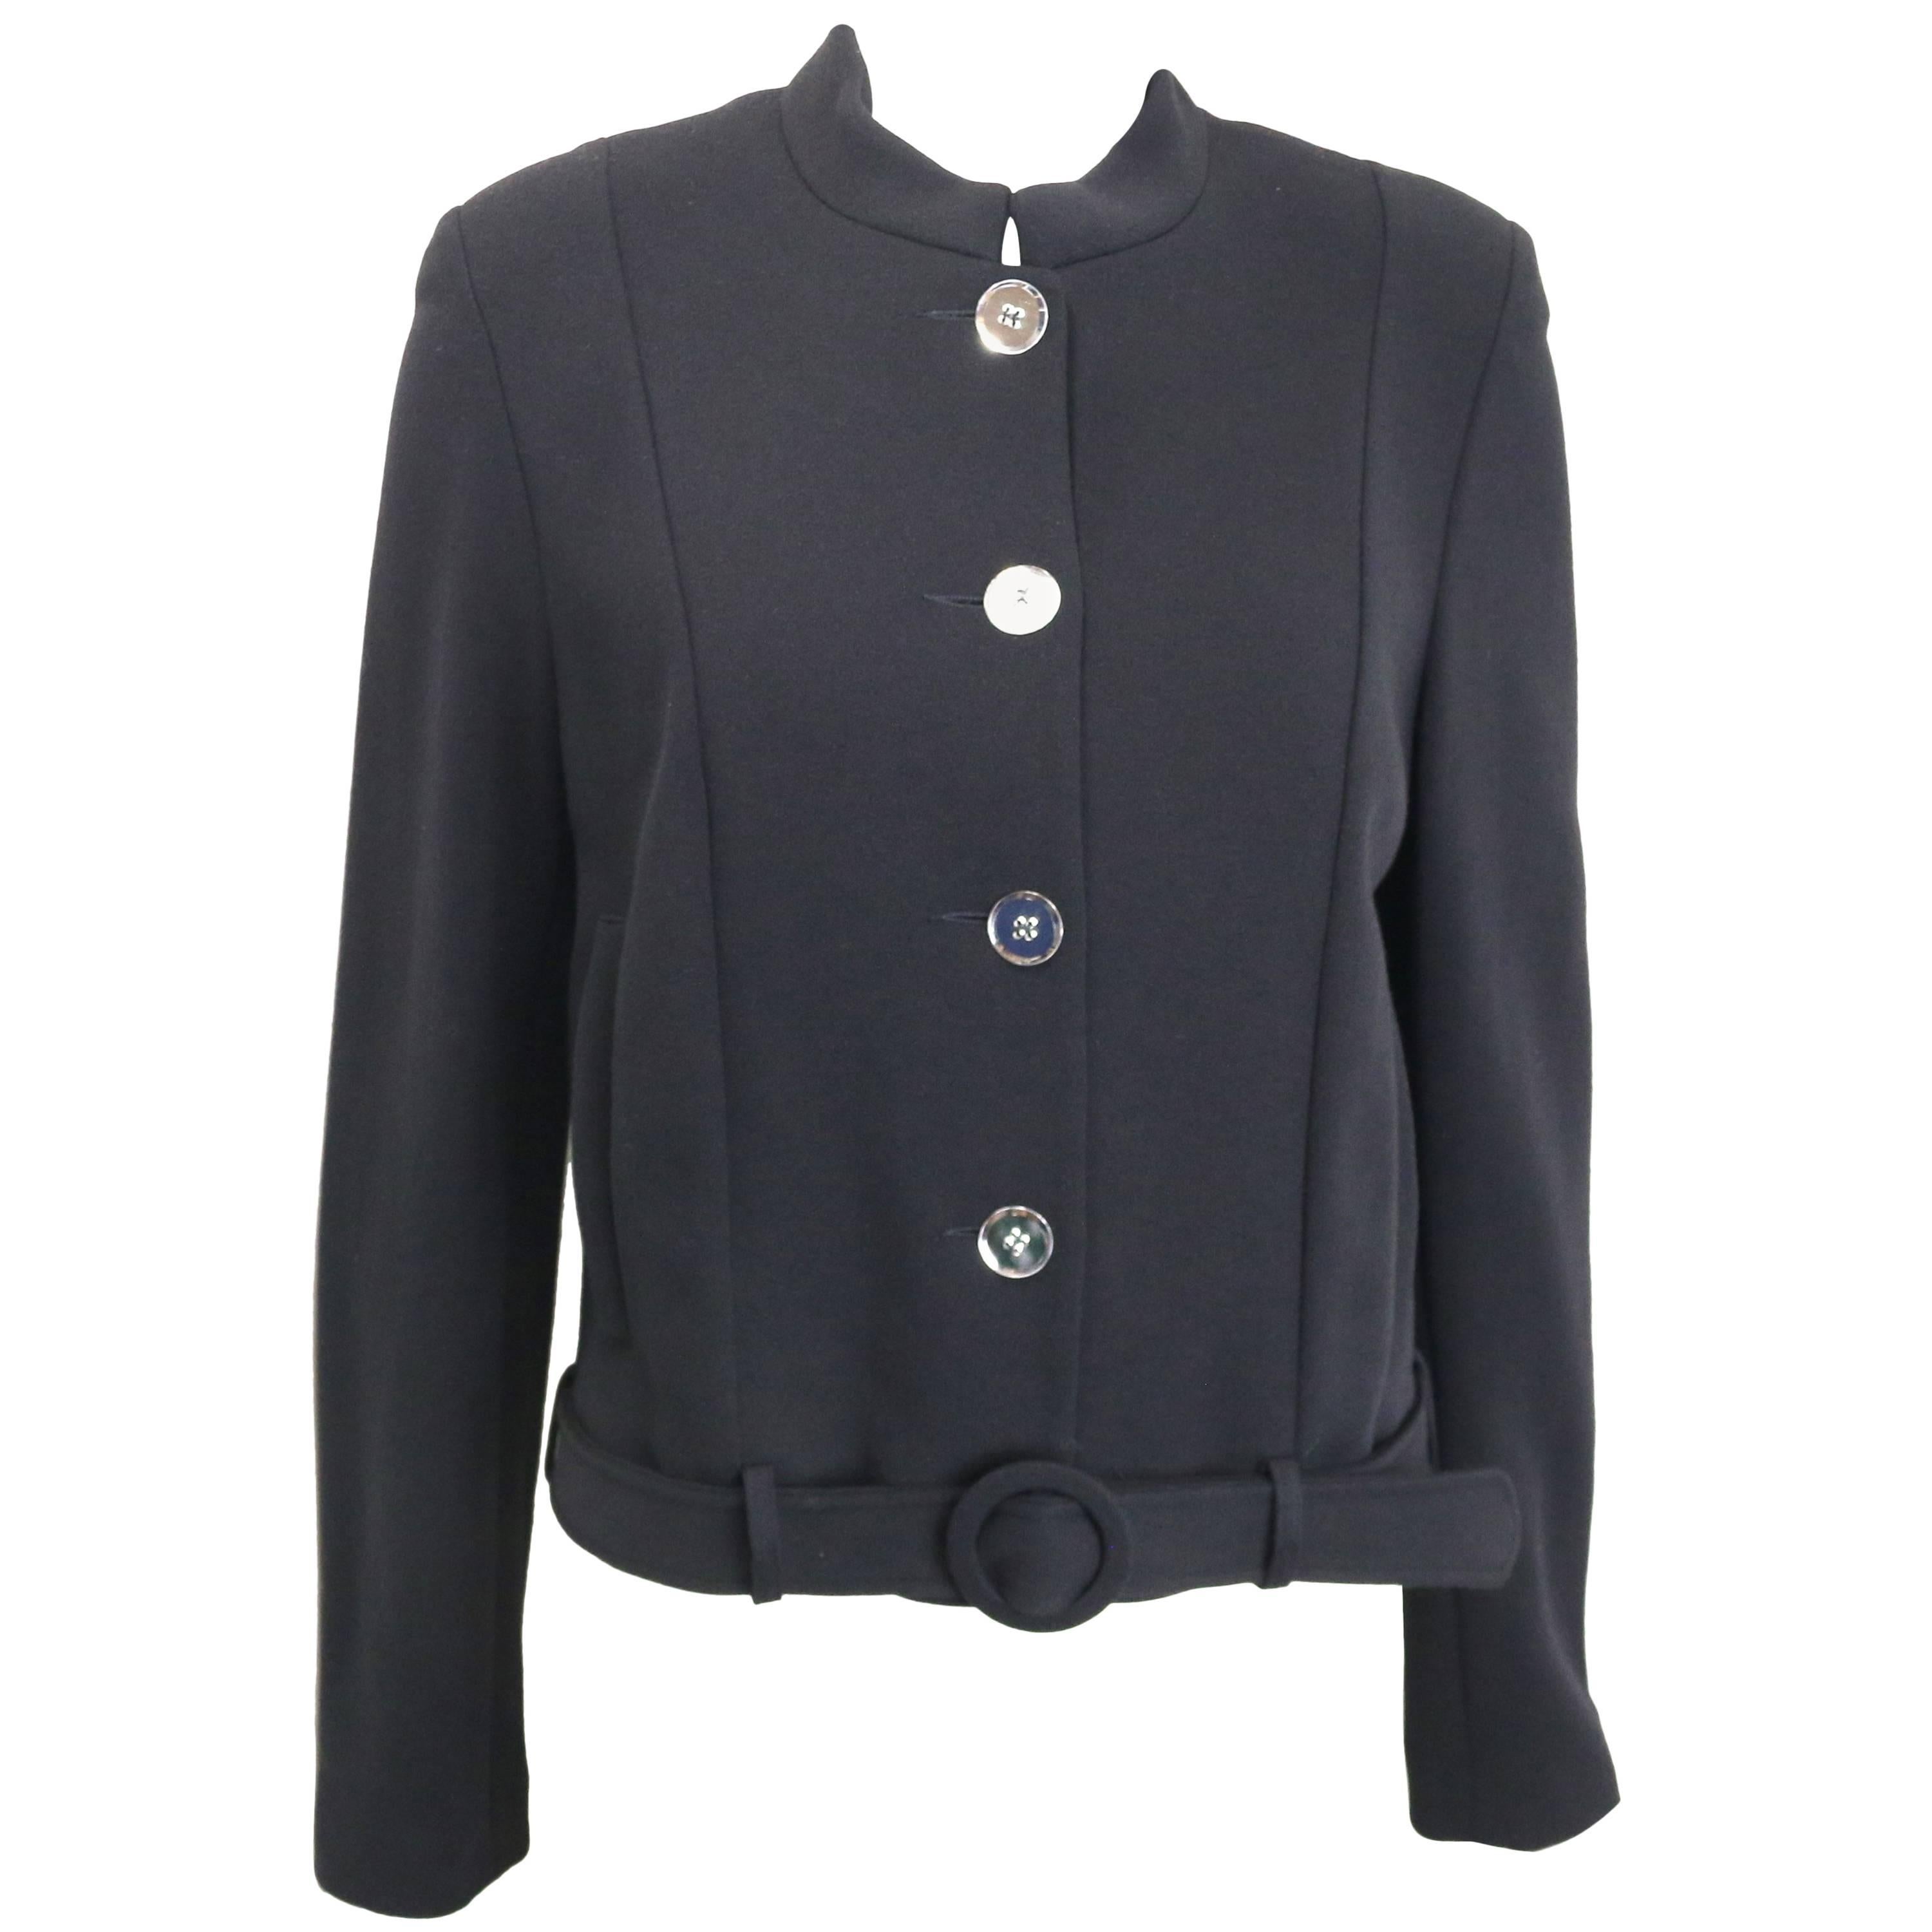 Dorothee Bis Black Mandarin Neck with Mirror Buttons and Belt Cropped Jacket For Sale